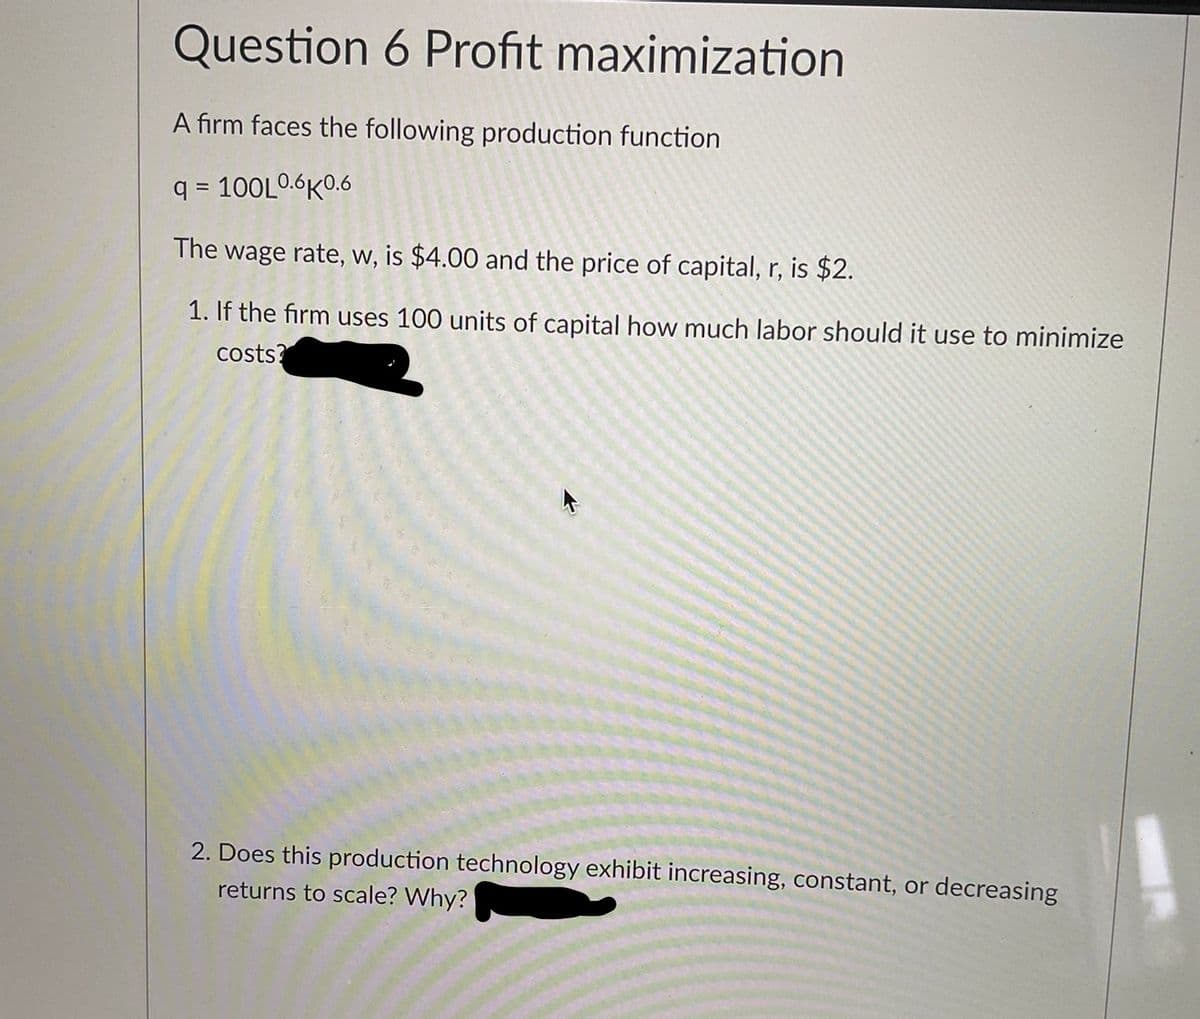 Question 6 Profit maximization
A firm faces the following production function
q = 100L0.6K0.6
The wage rate, w, is $4.00 and the price of capital, r, is $2.
1. If the firm uses 100 units of capital how much labor should it use to minimize
costs?
2. Does this production technology exhibit increasing, constant, or decreasing
returns to scale? Why?
